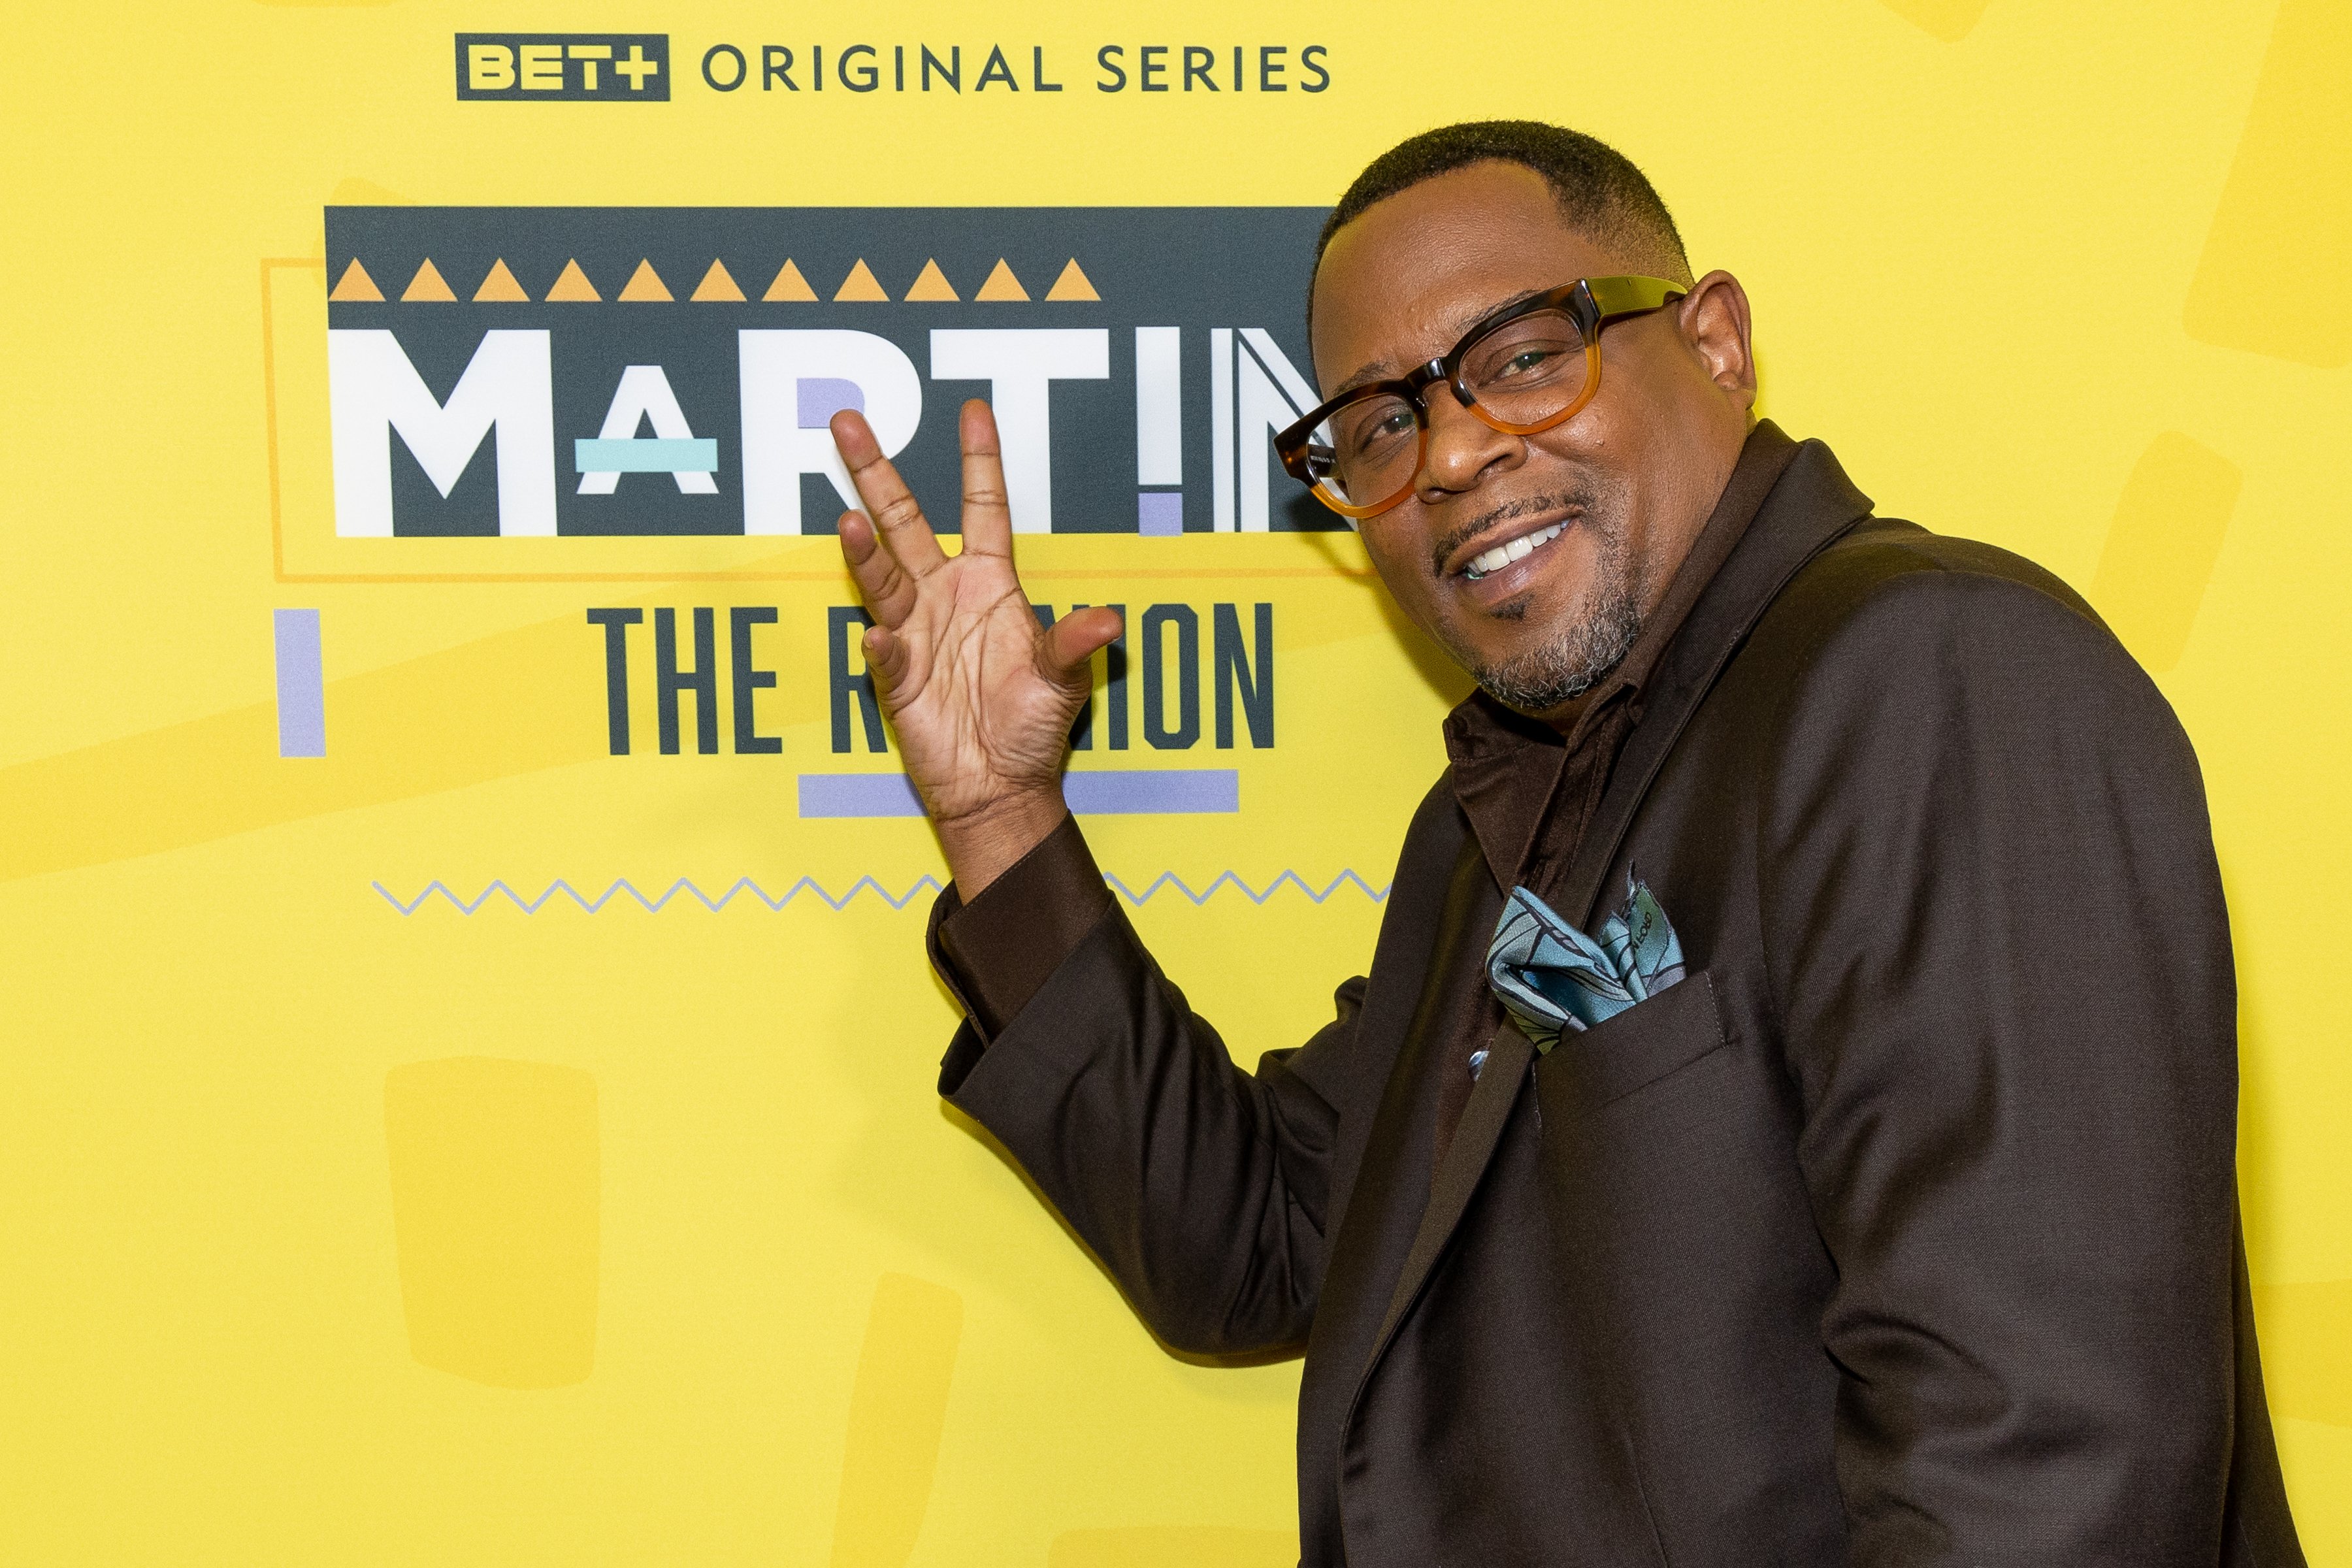 Martin Lawrence poses as BET+ hosts a celebration with the cast and crew of 'Martin: The Reunion' on June 15, 2022, in Los Angeles, California | Source: Getty Images